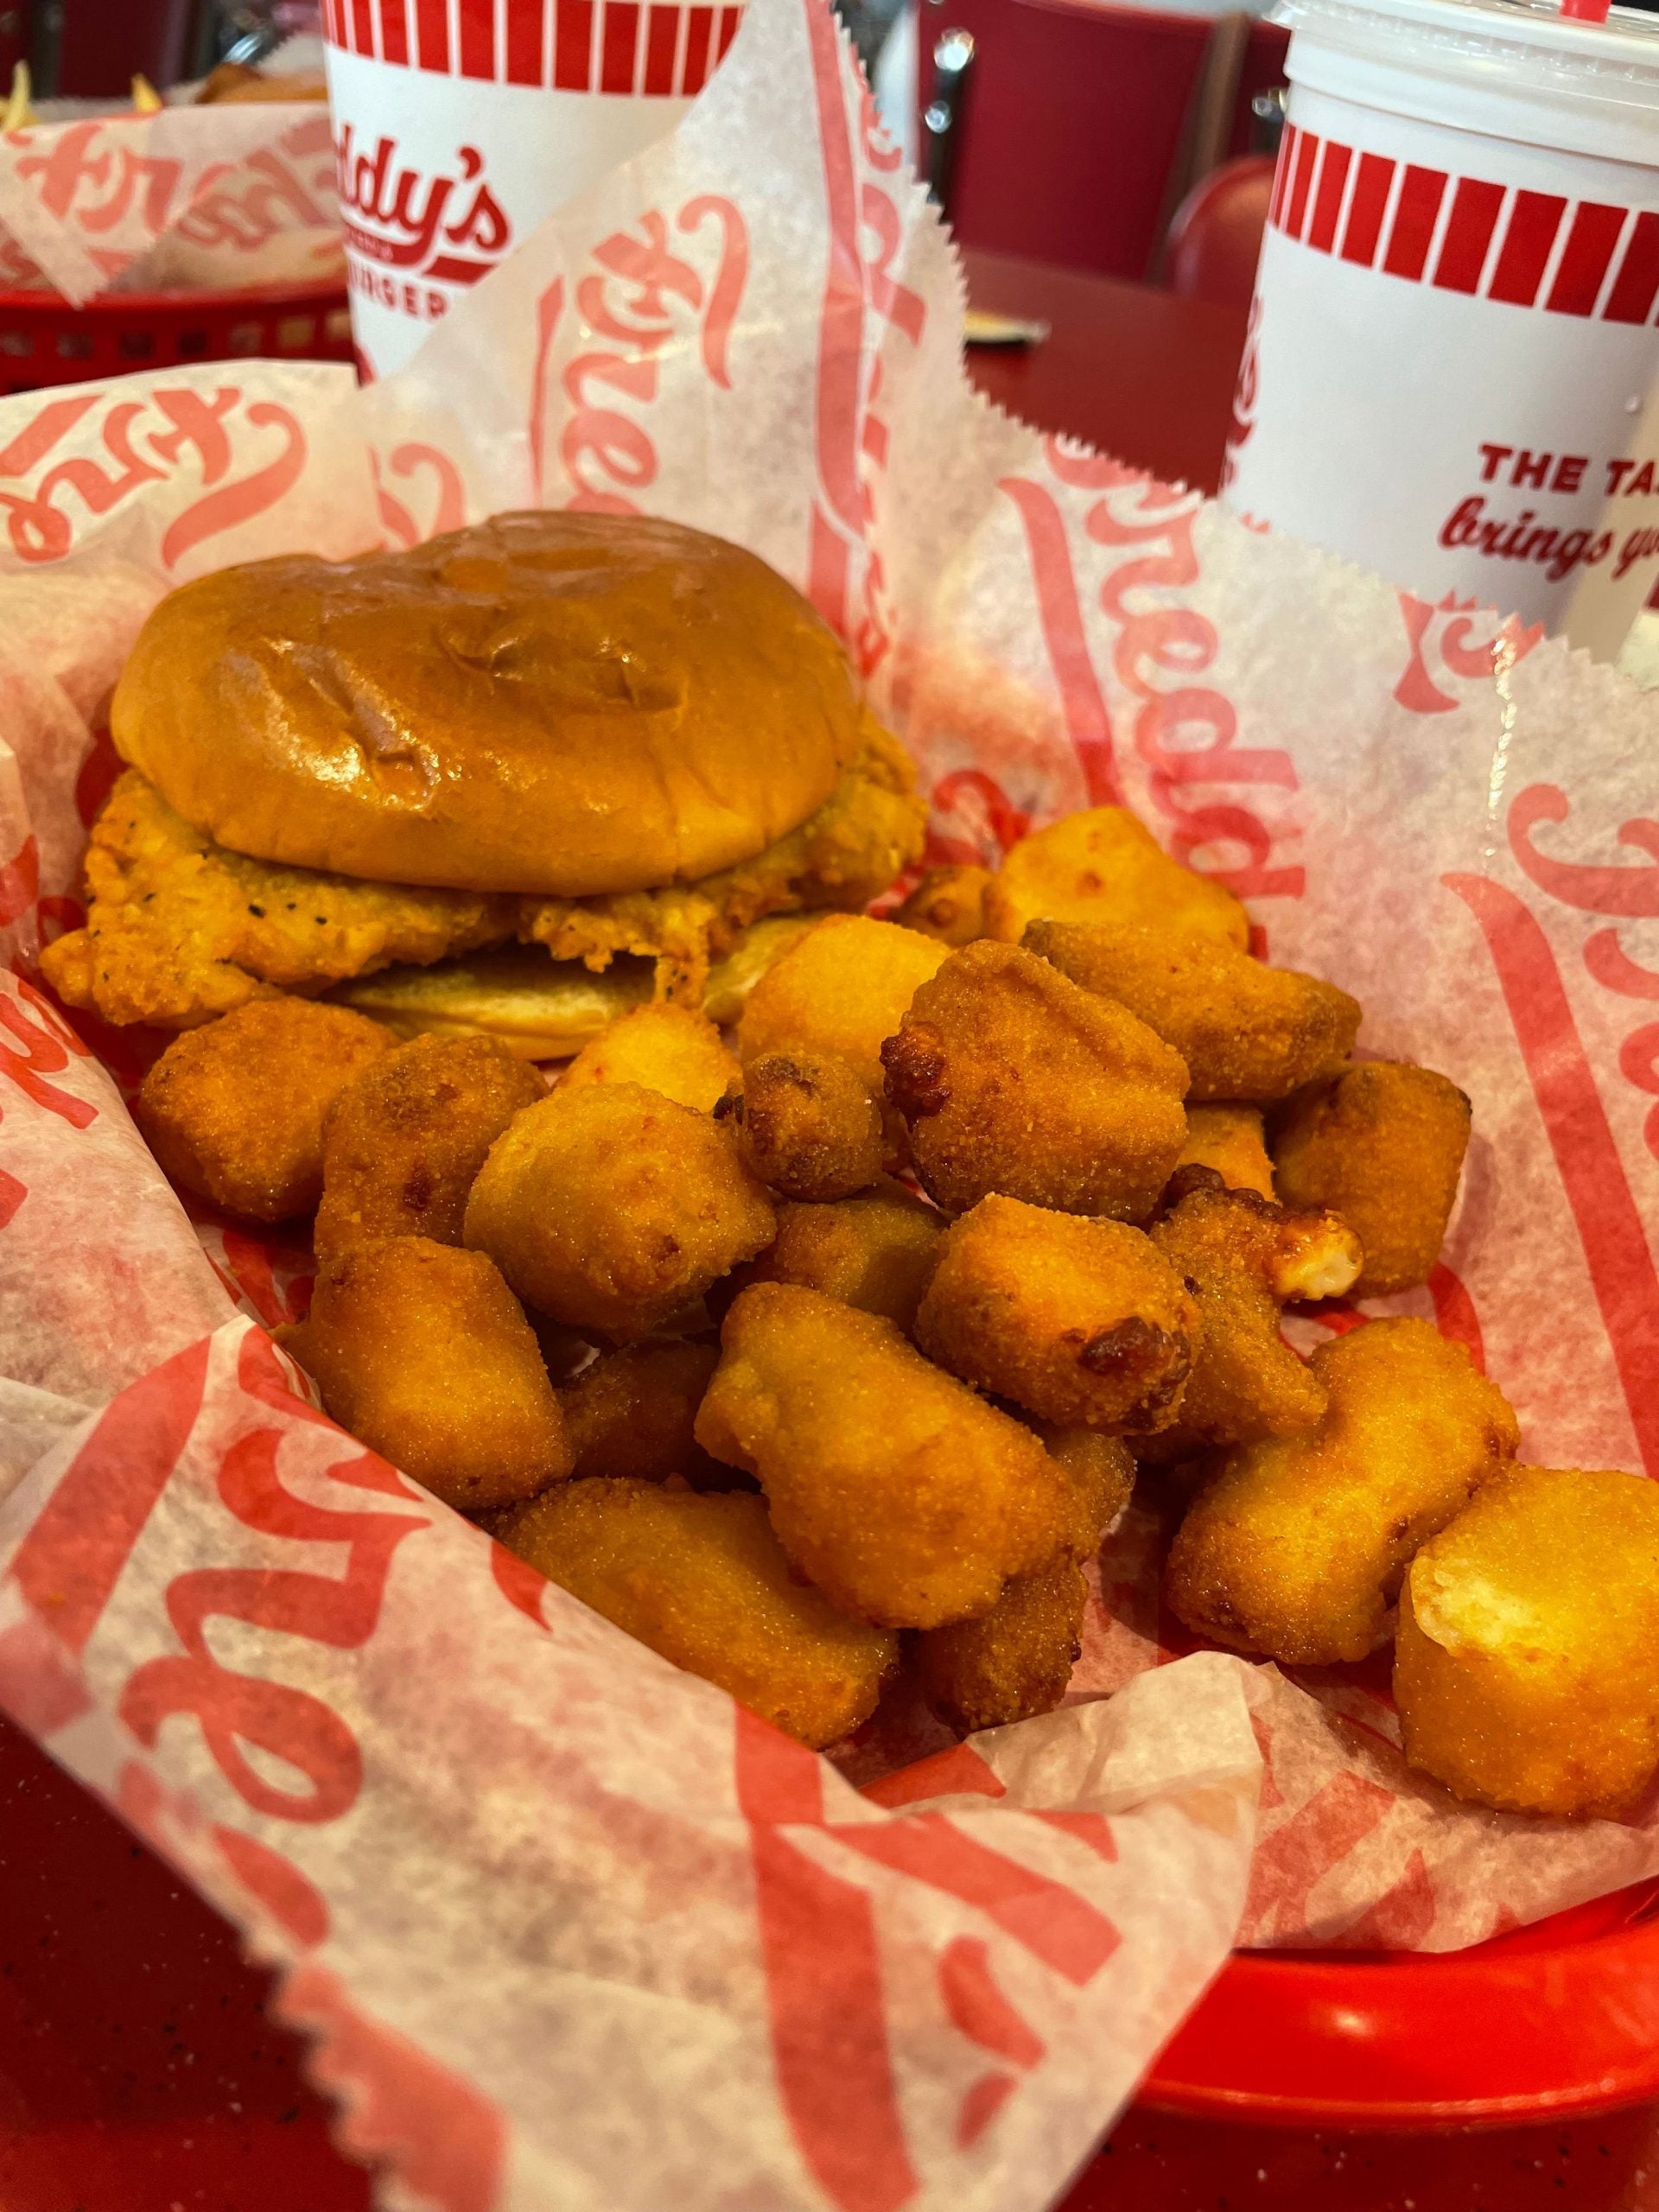 Freddy's in North Augusta - A Review